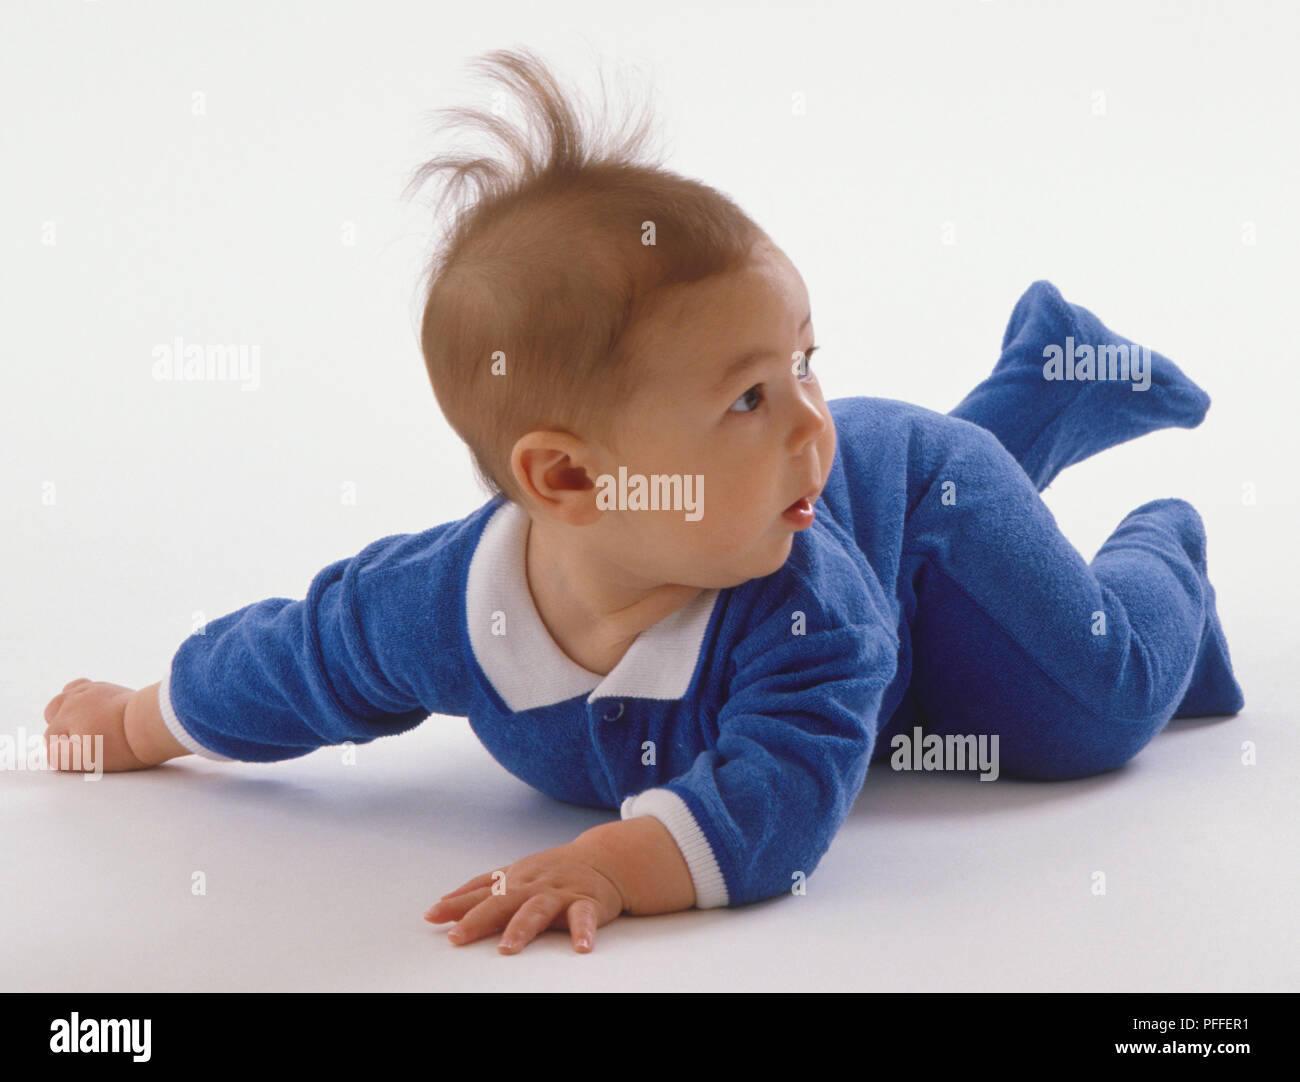 Baby wearing blue and white jumpsuit, hair standing on end, crawling on his belly. Stock Photo